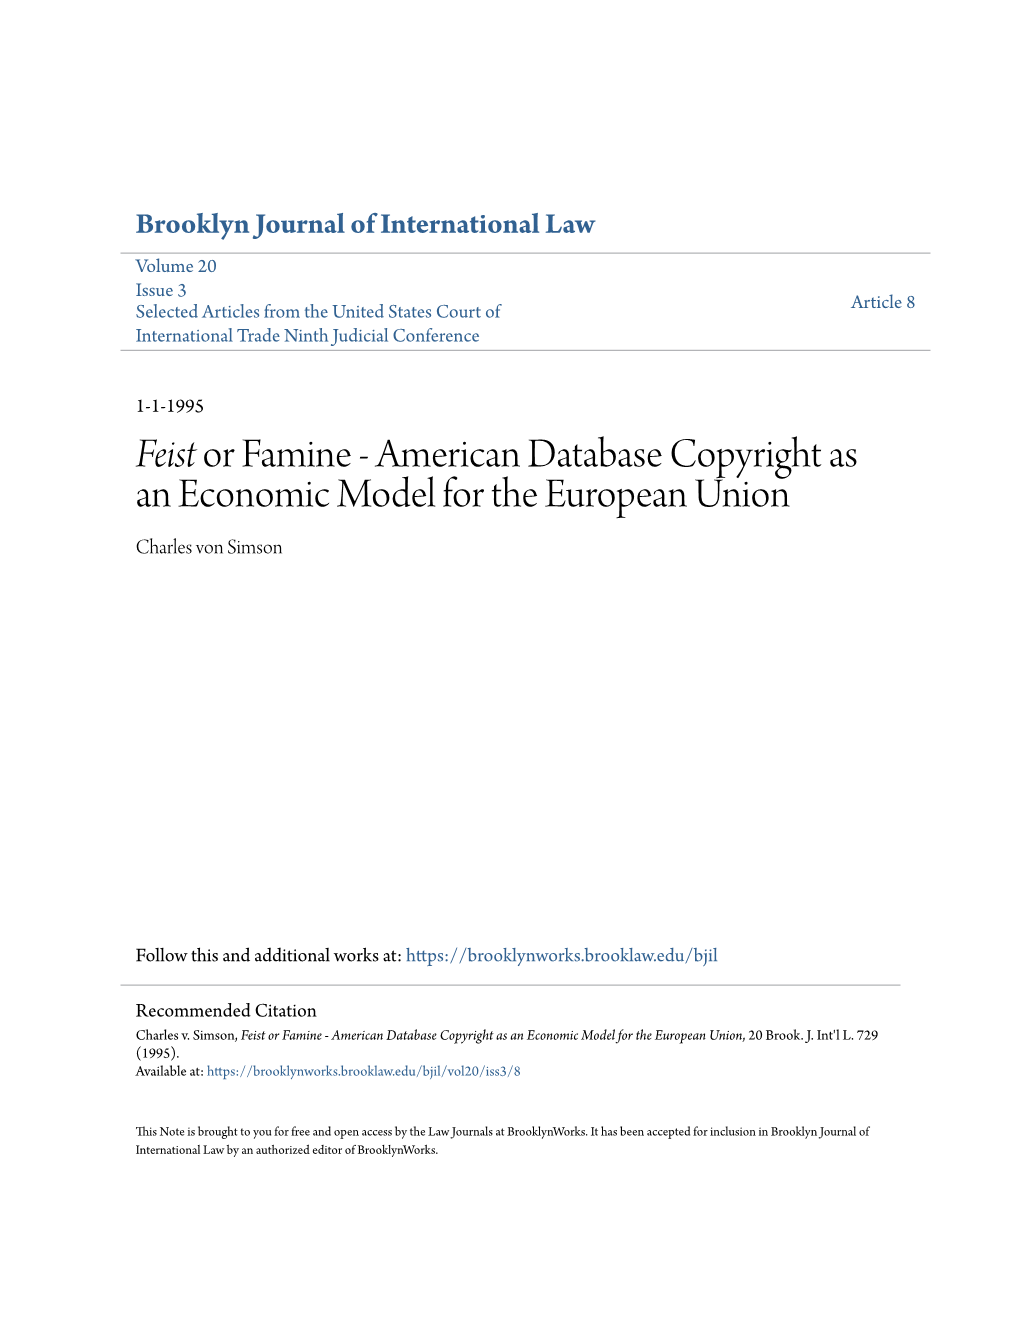 Feist Or Famine - American Database Copyright As an Economic Model for the European Union Charles Von Simson